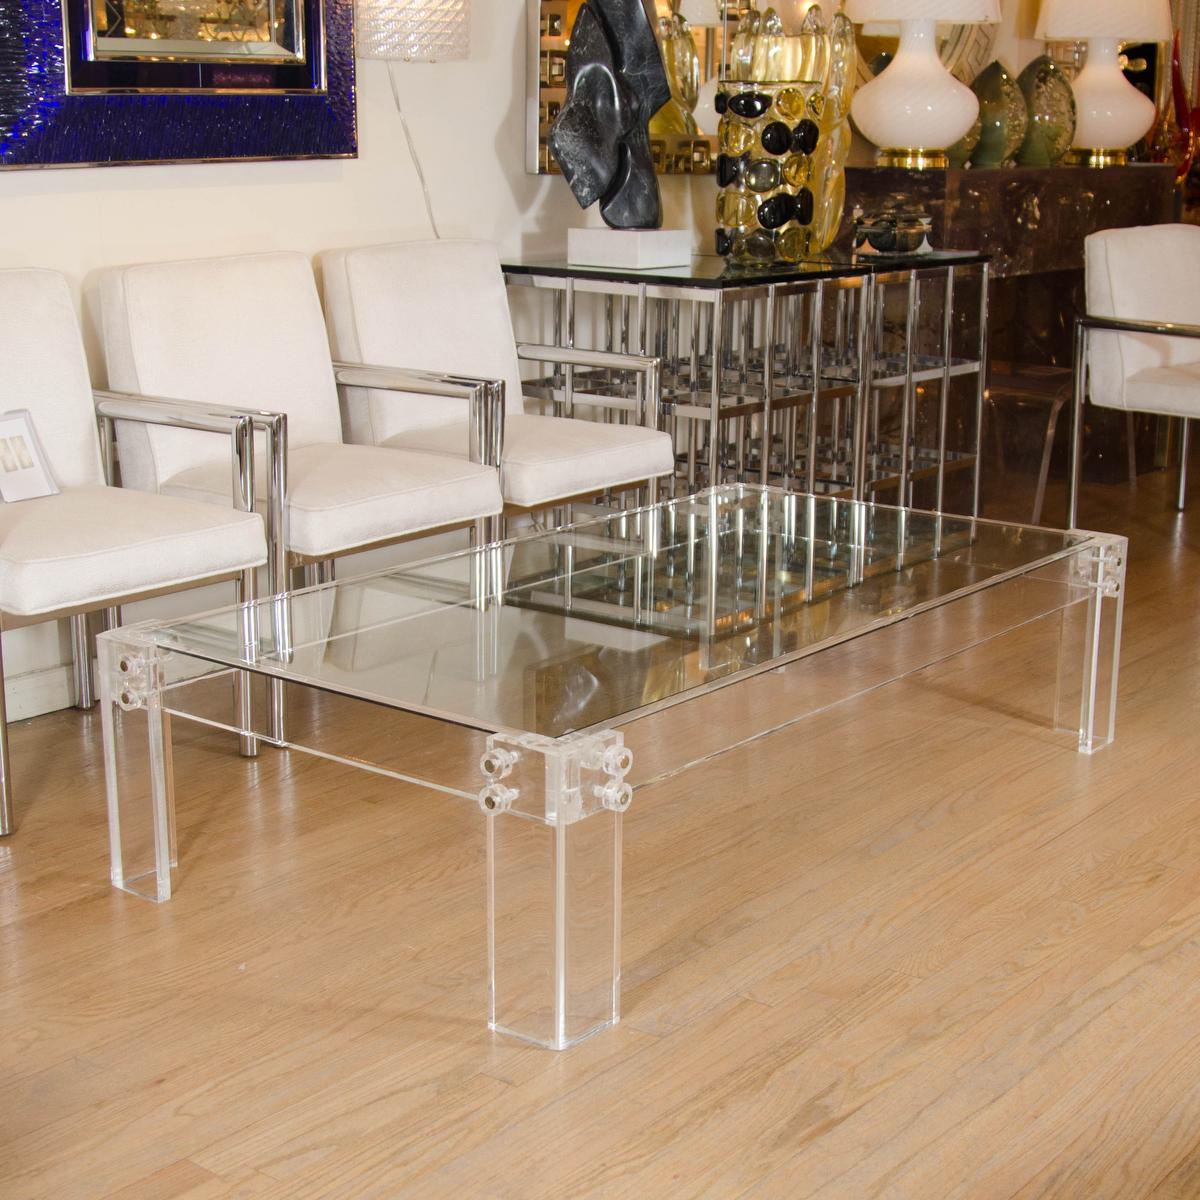 Rectangular lucite coffee table with glass top and nickel detail.